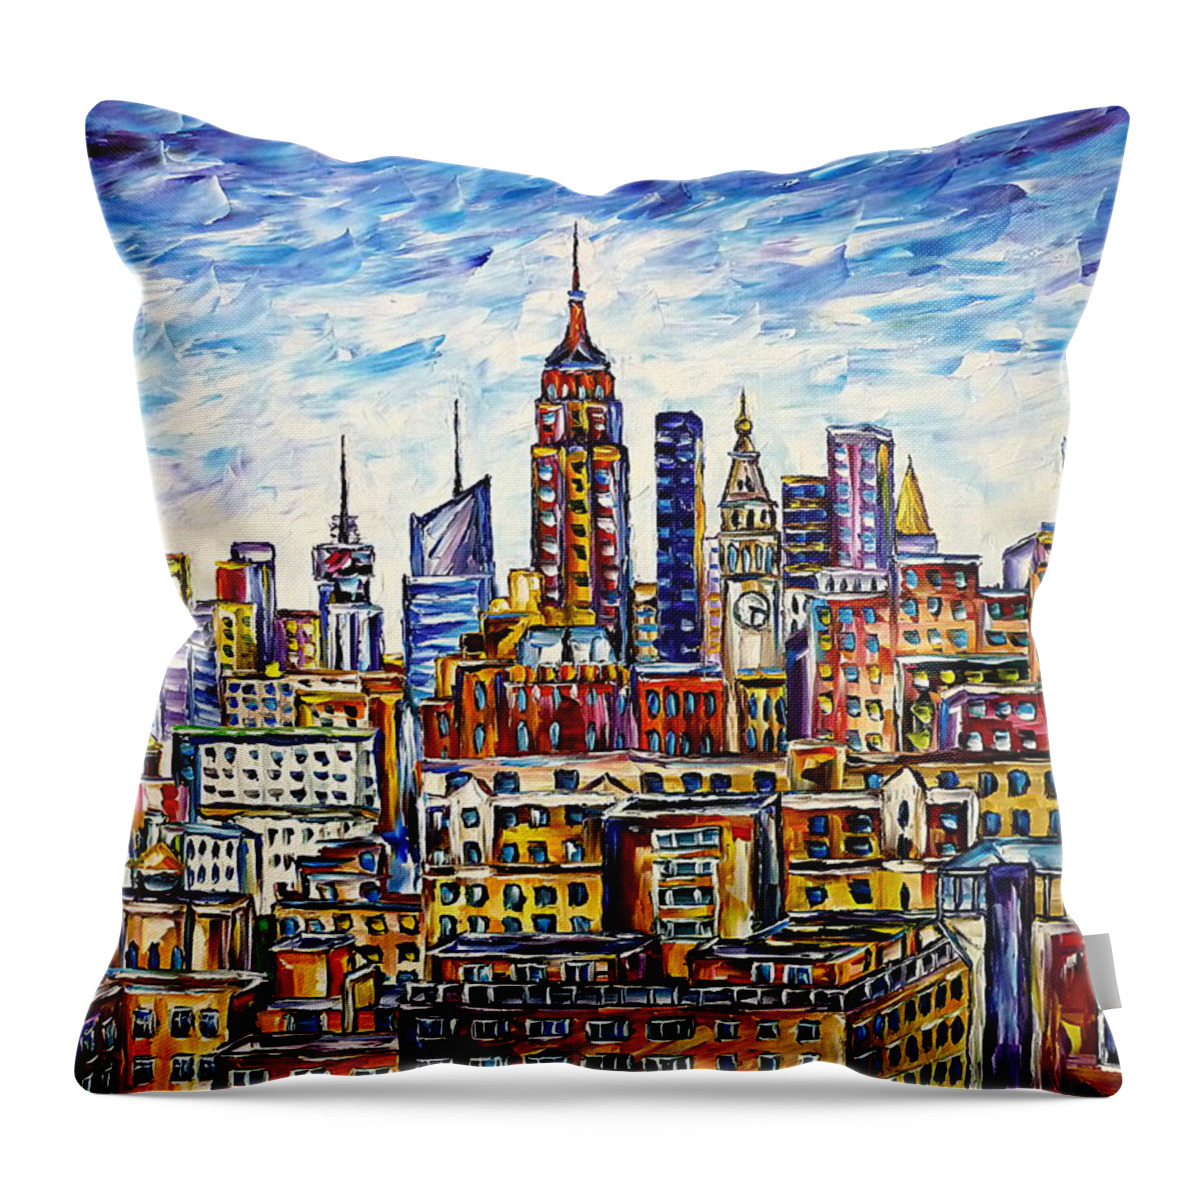 New York From Above Throw Pillow featuring the painting The Rooftops Of New York by Mirek Kuzniar